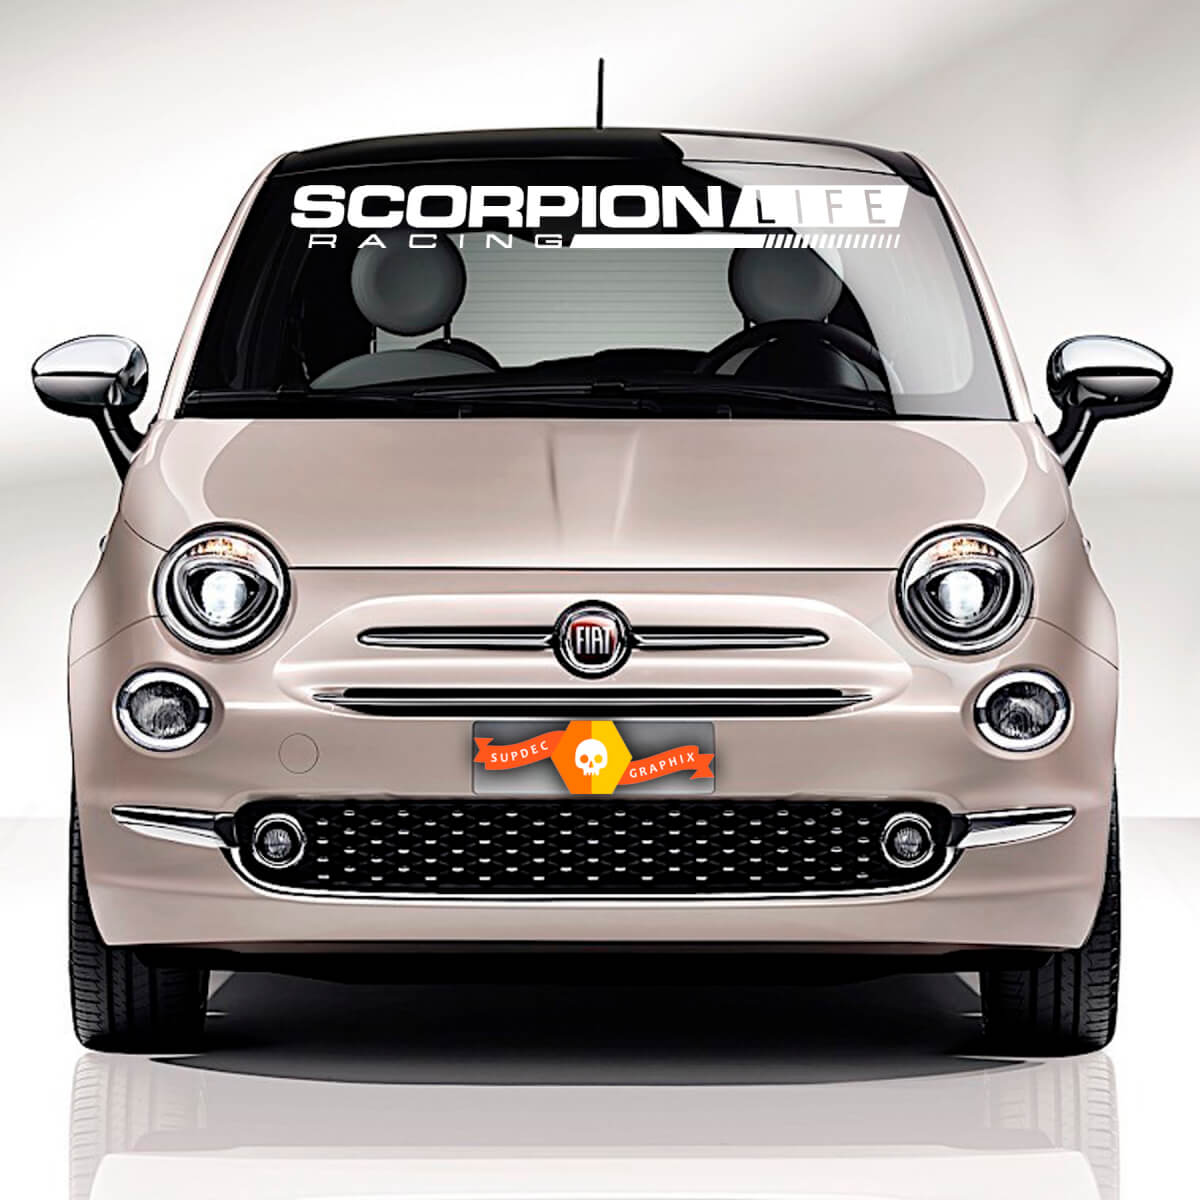 Fiat 500 ABARTH Windshield Scorpion Decal side Graphics stripes